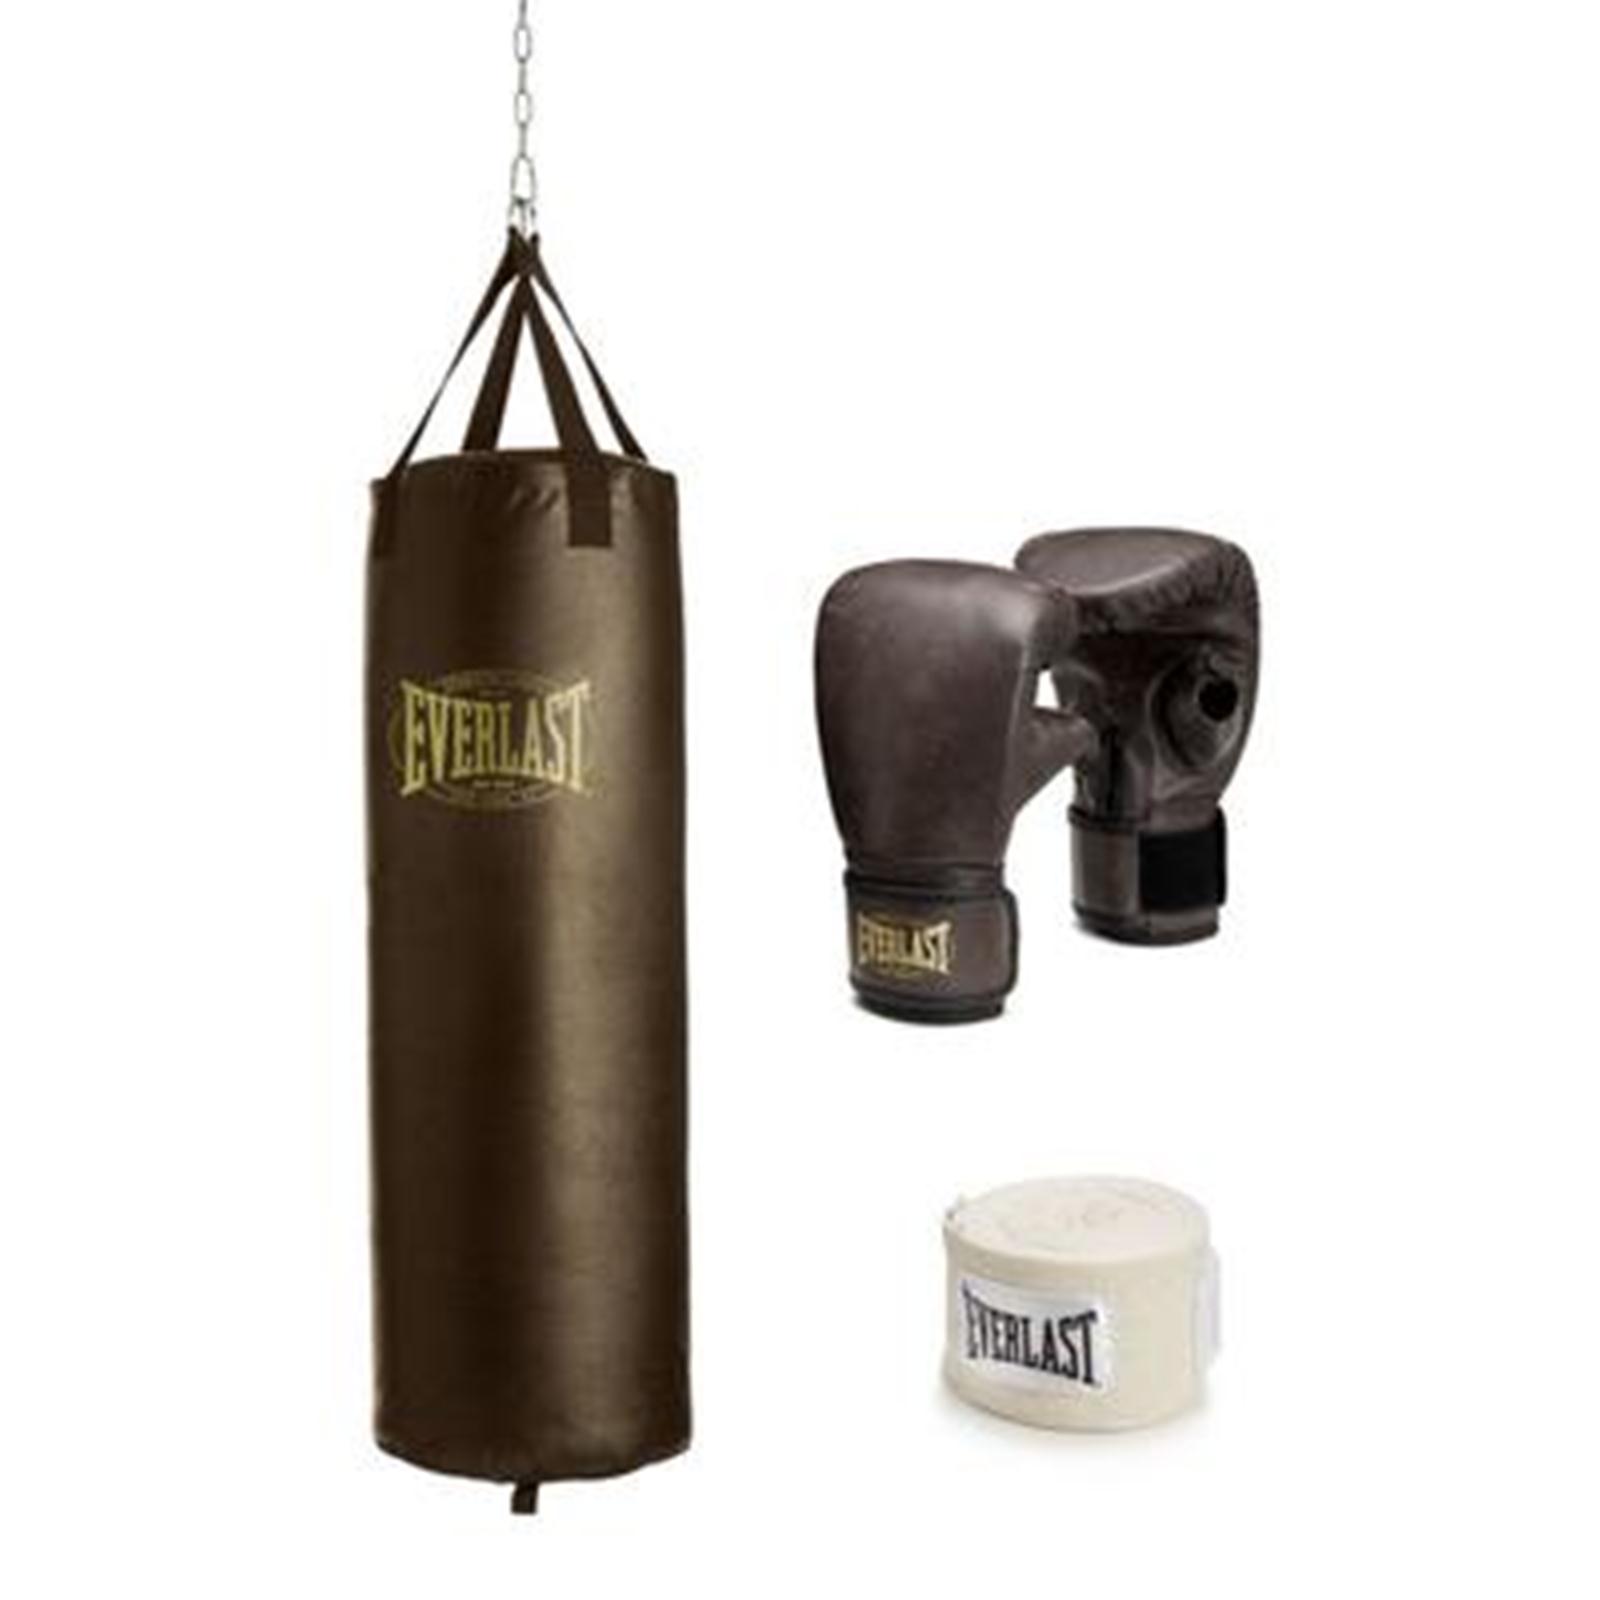 Everlast&reg; 70 lb. Vintage Heavy Bag with Gloves and Hand Wraps